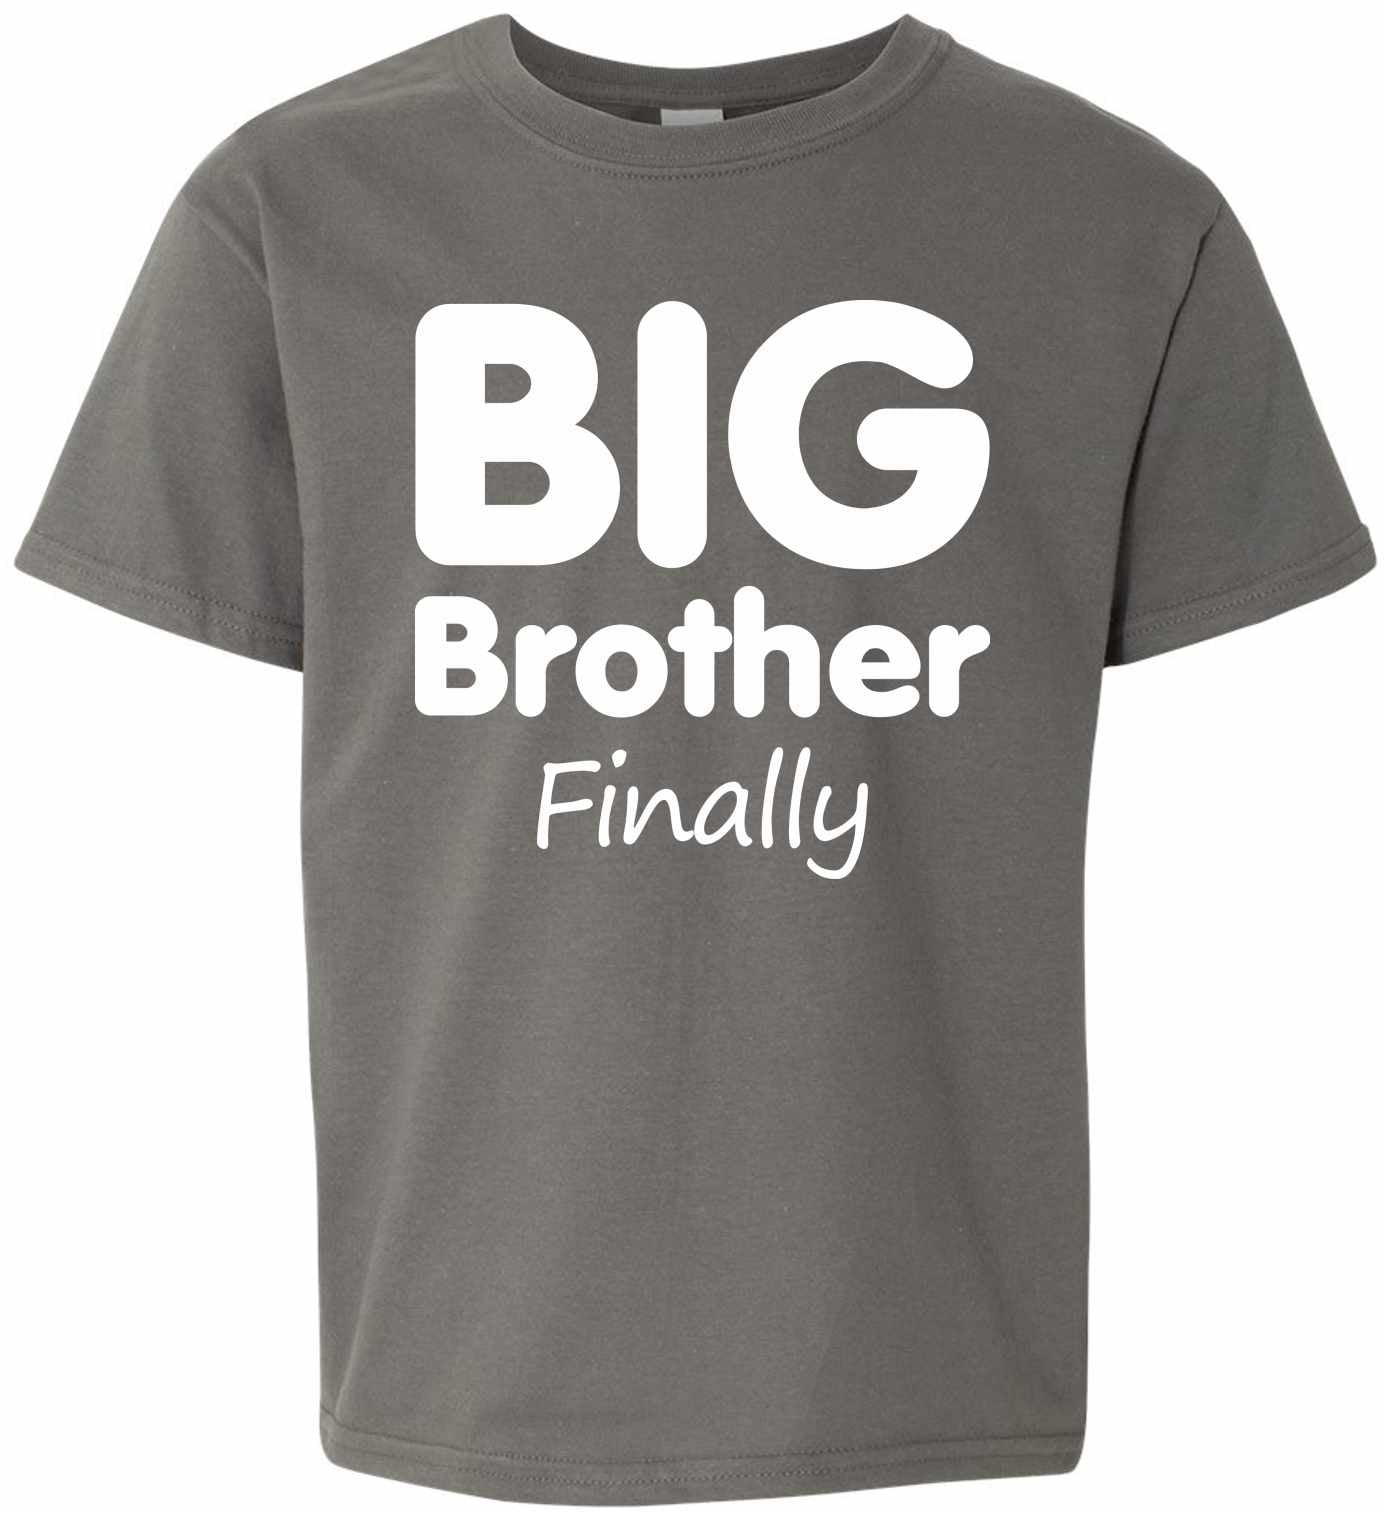 Big Brother Finally on Youth T-Shirt (#962-201)